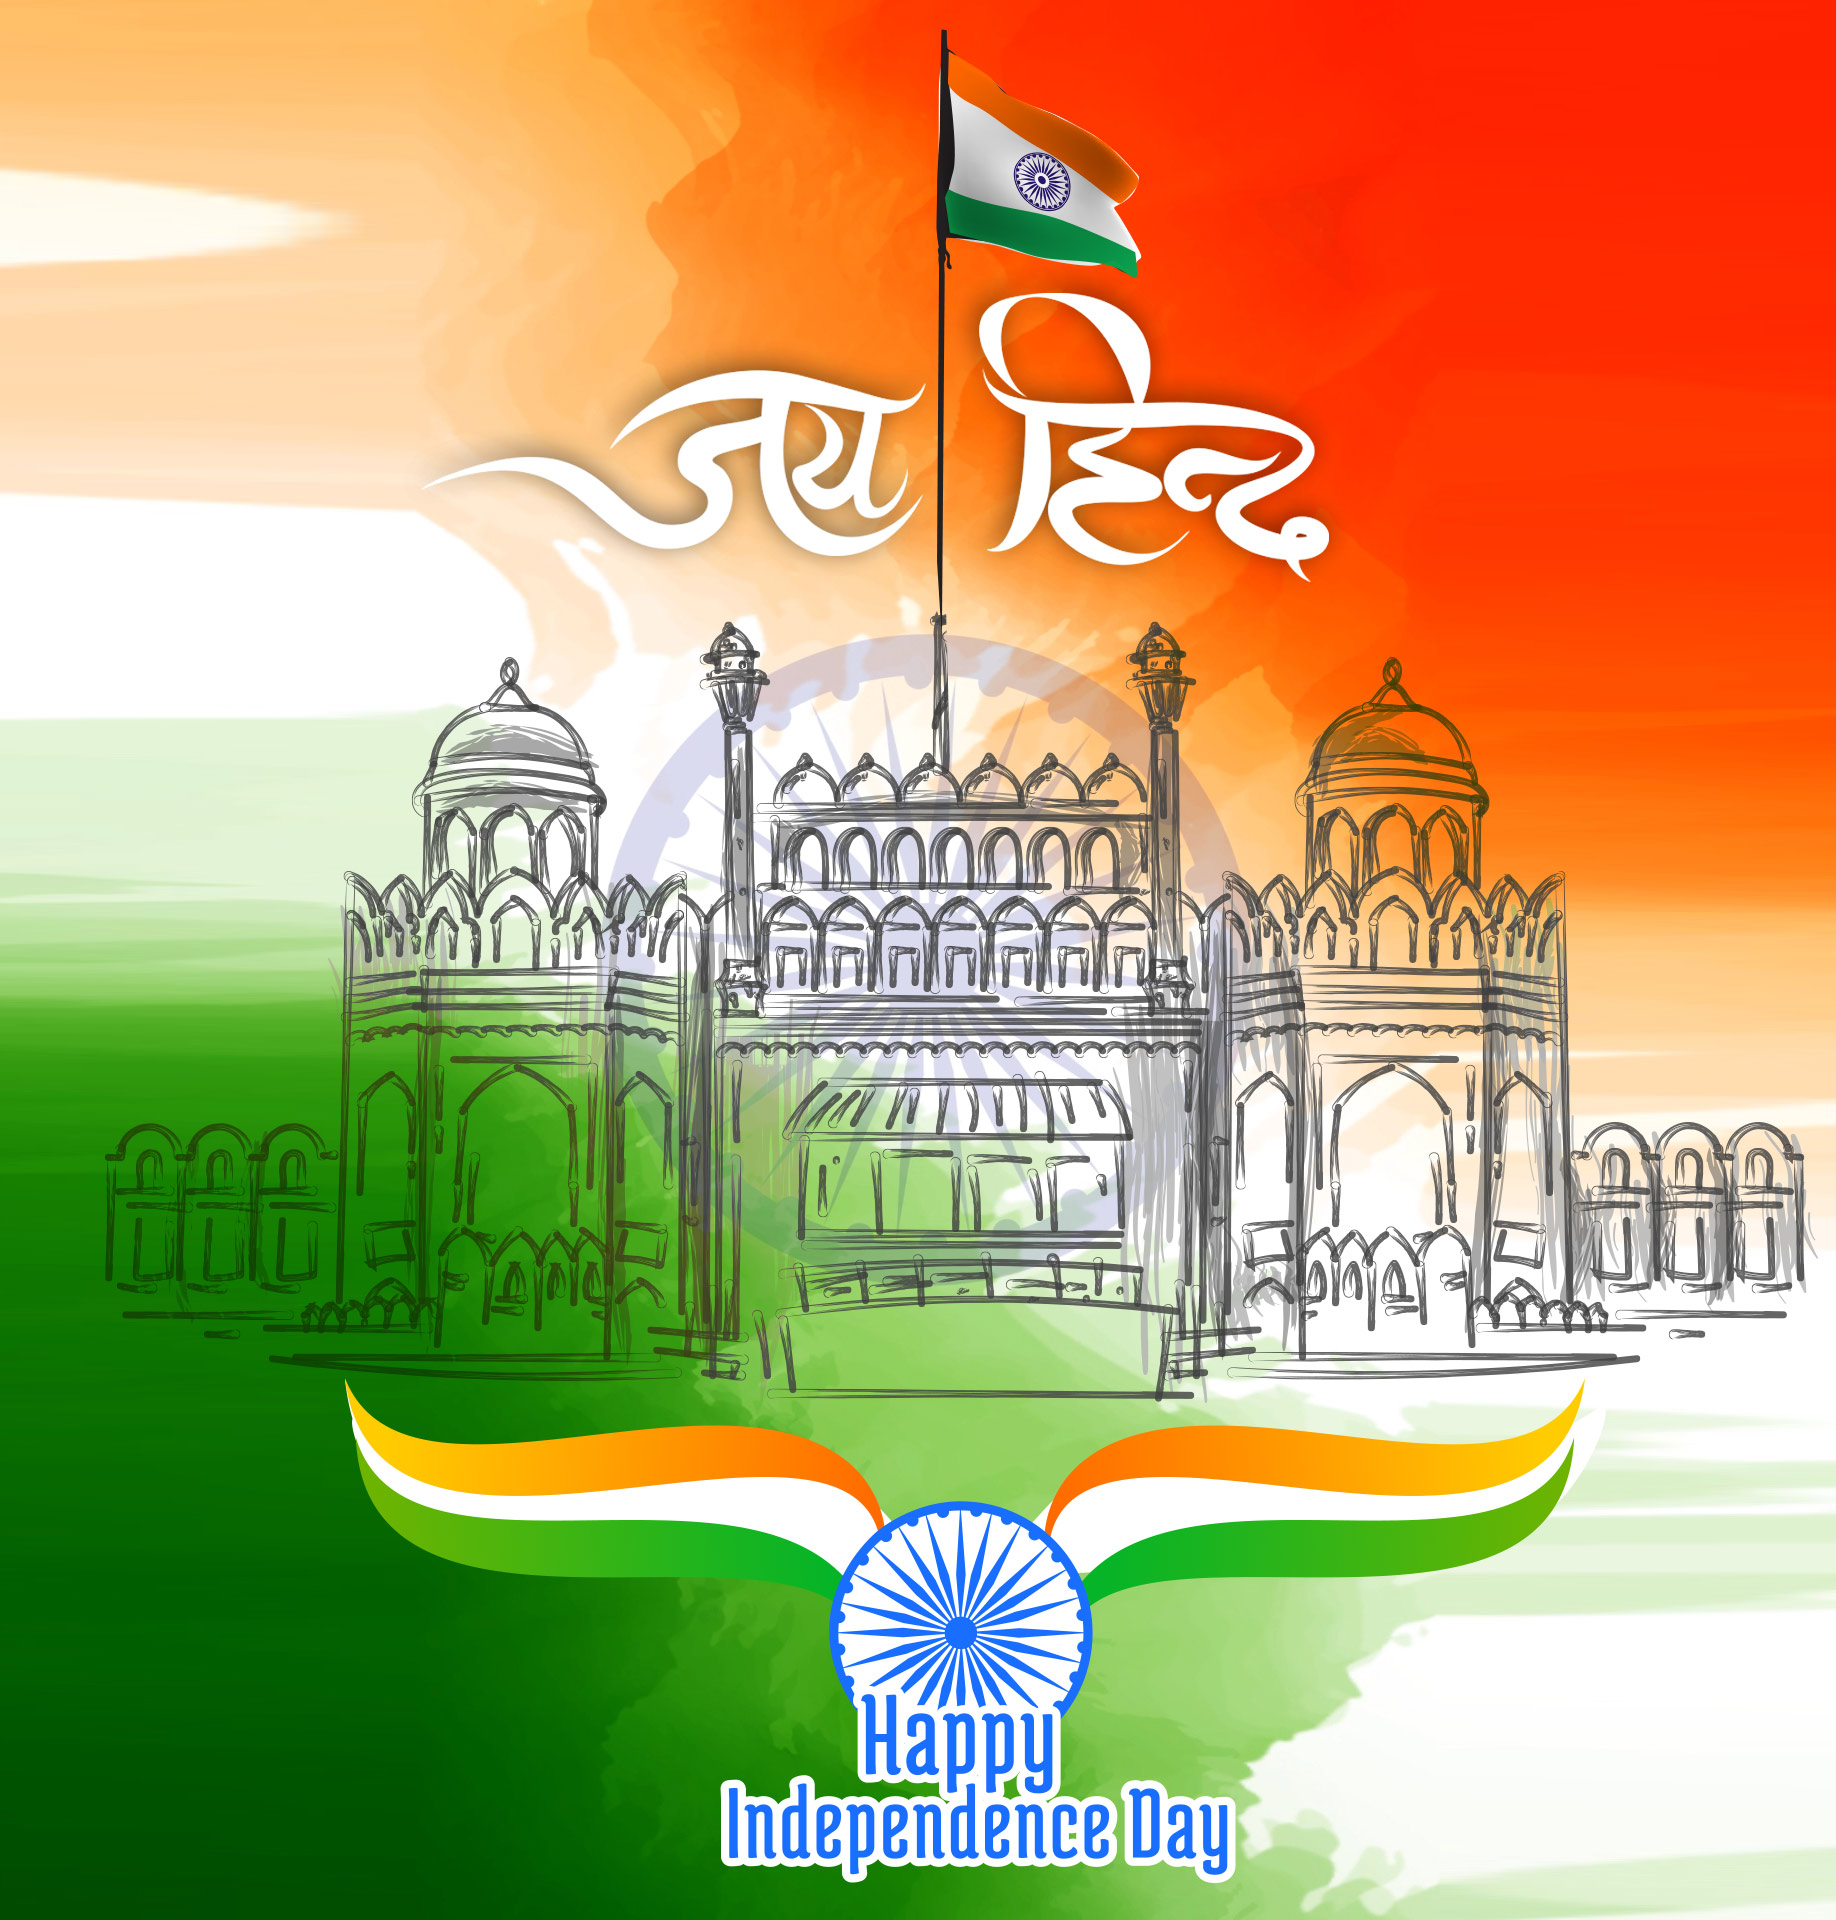 Independence day images, wishes, greetings, HD wallpapers, quotes and messages